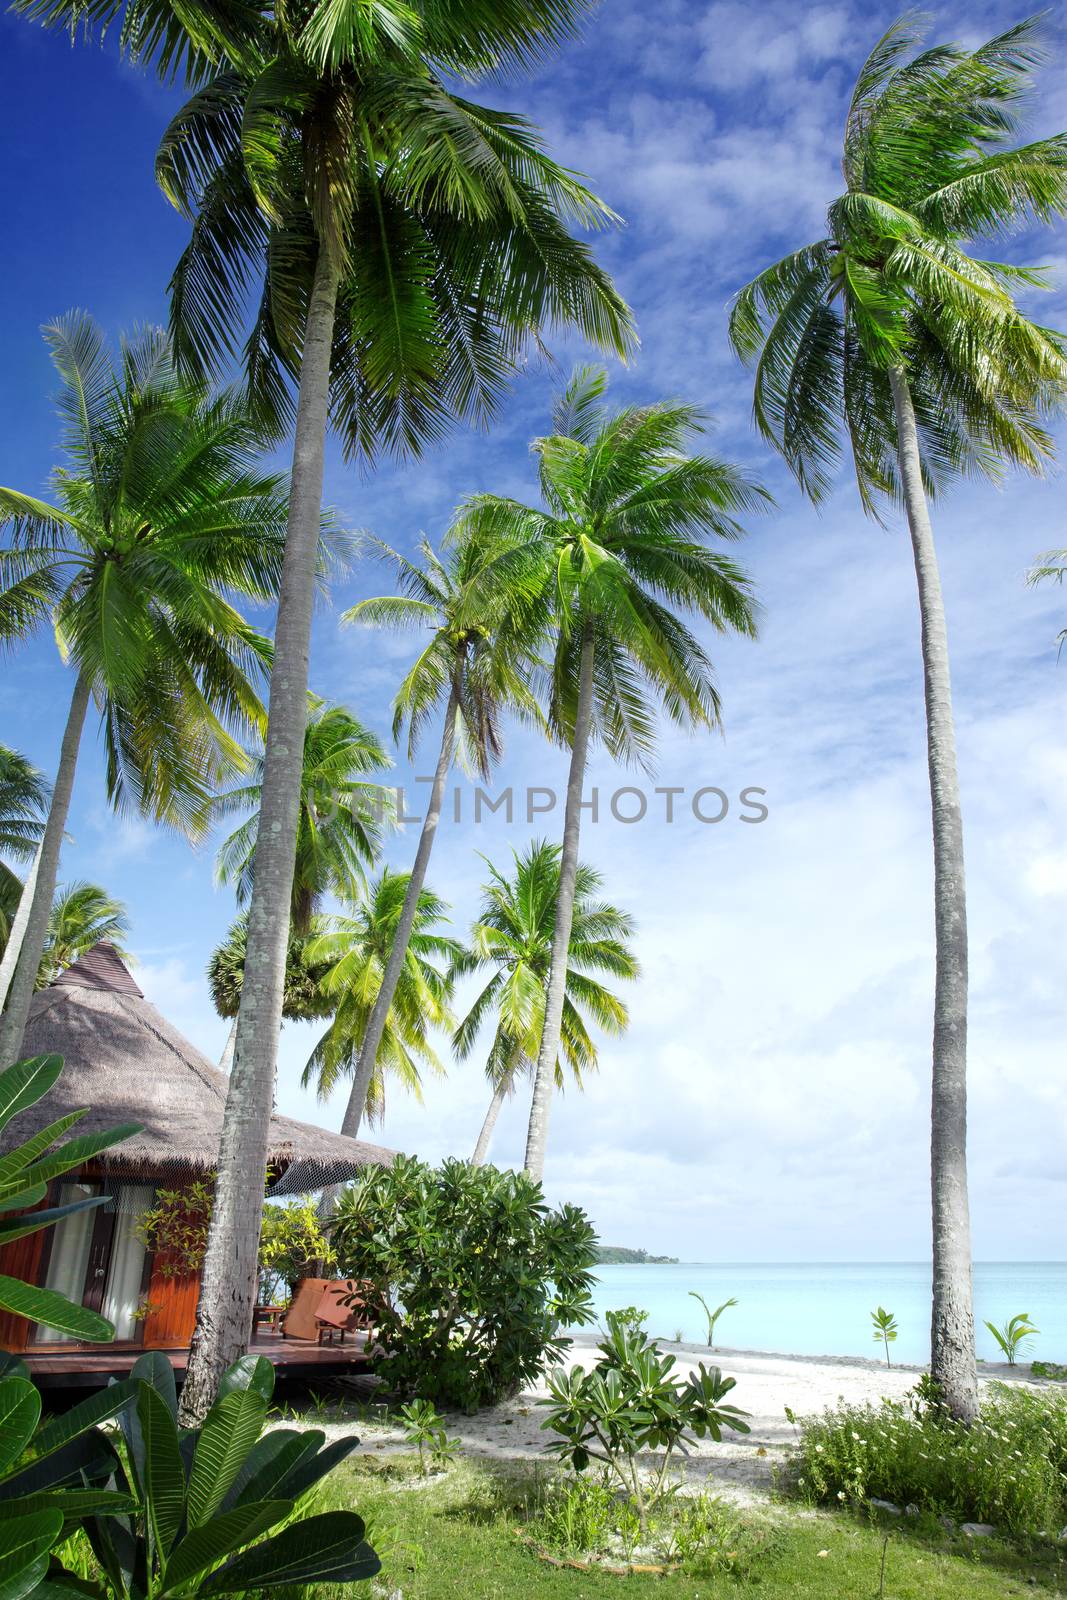 View of nice bungalow on  tropical empty sandy beach with some palm